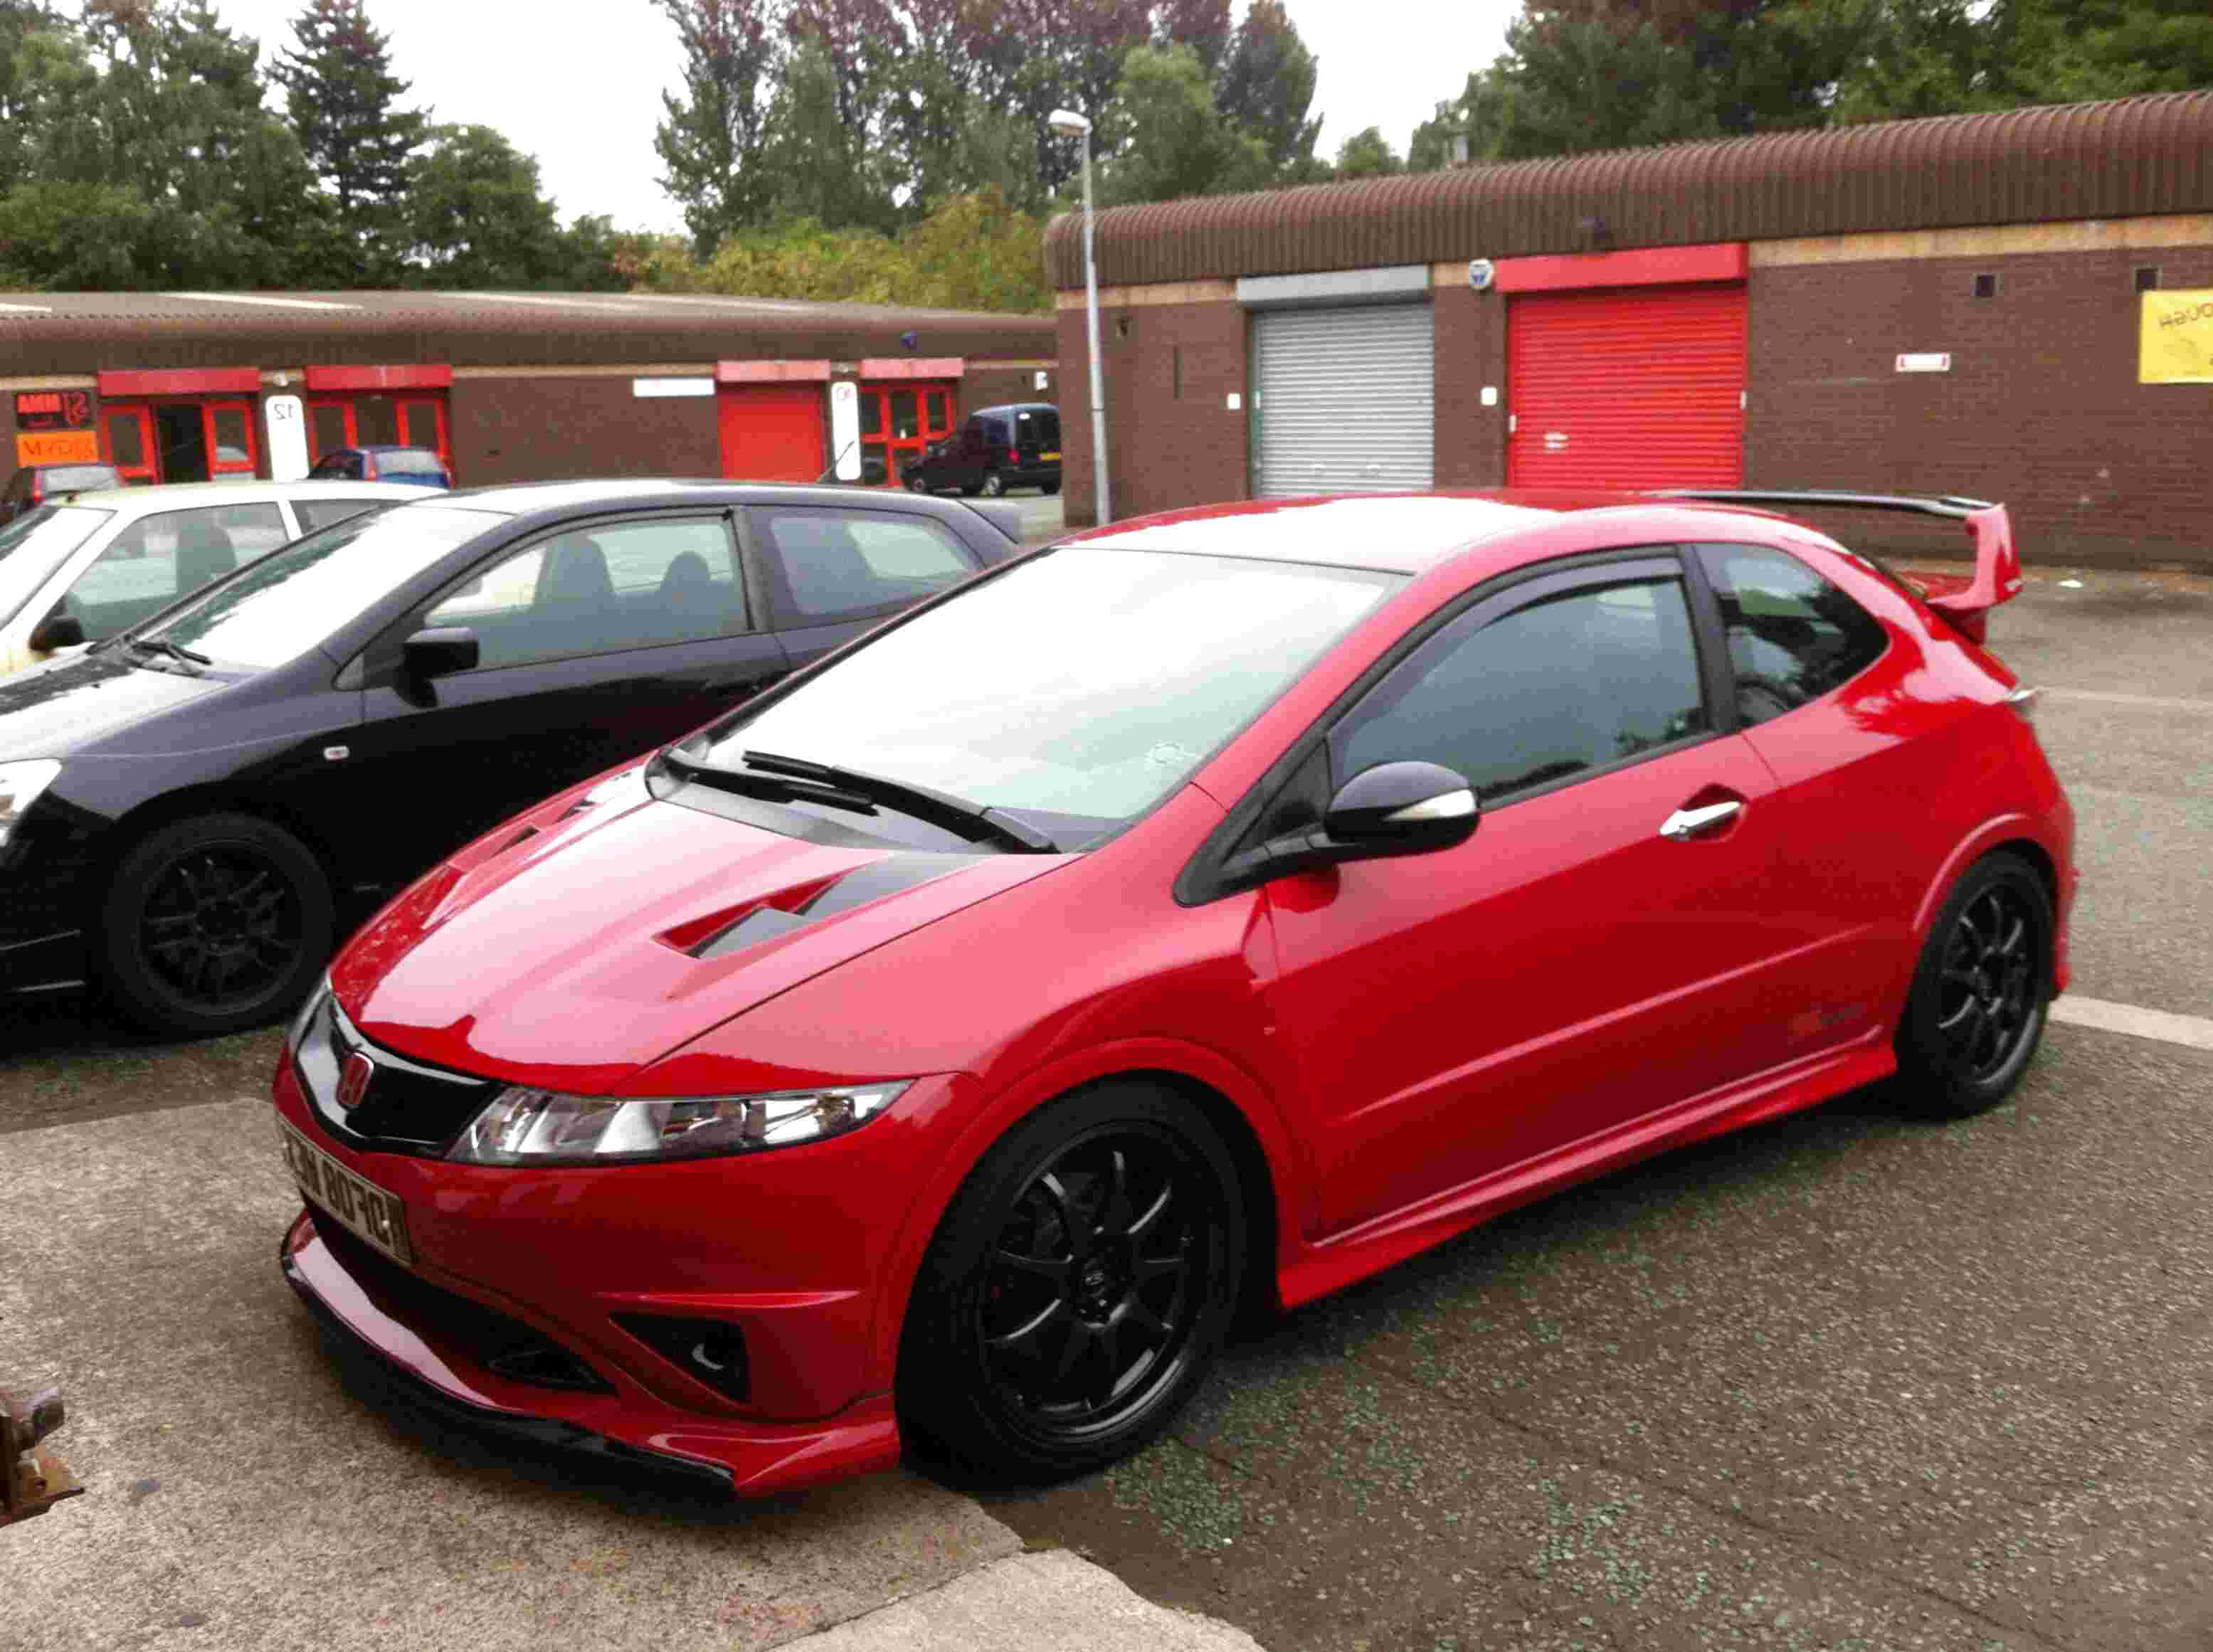 Honda Civic Type R Fn2 Cars for sale in UK View 68 ads